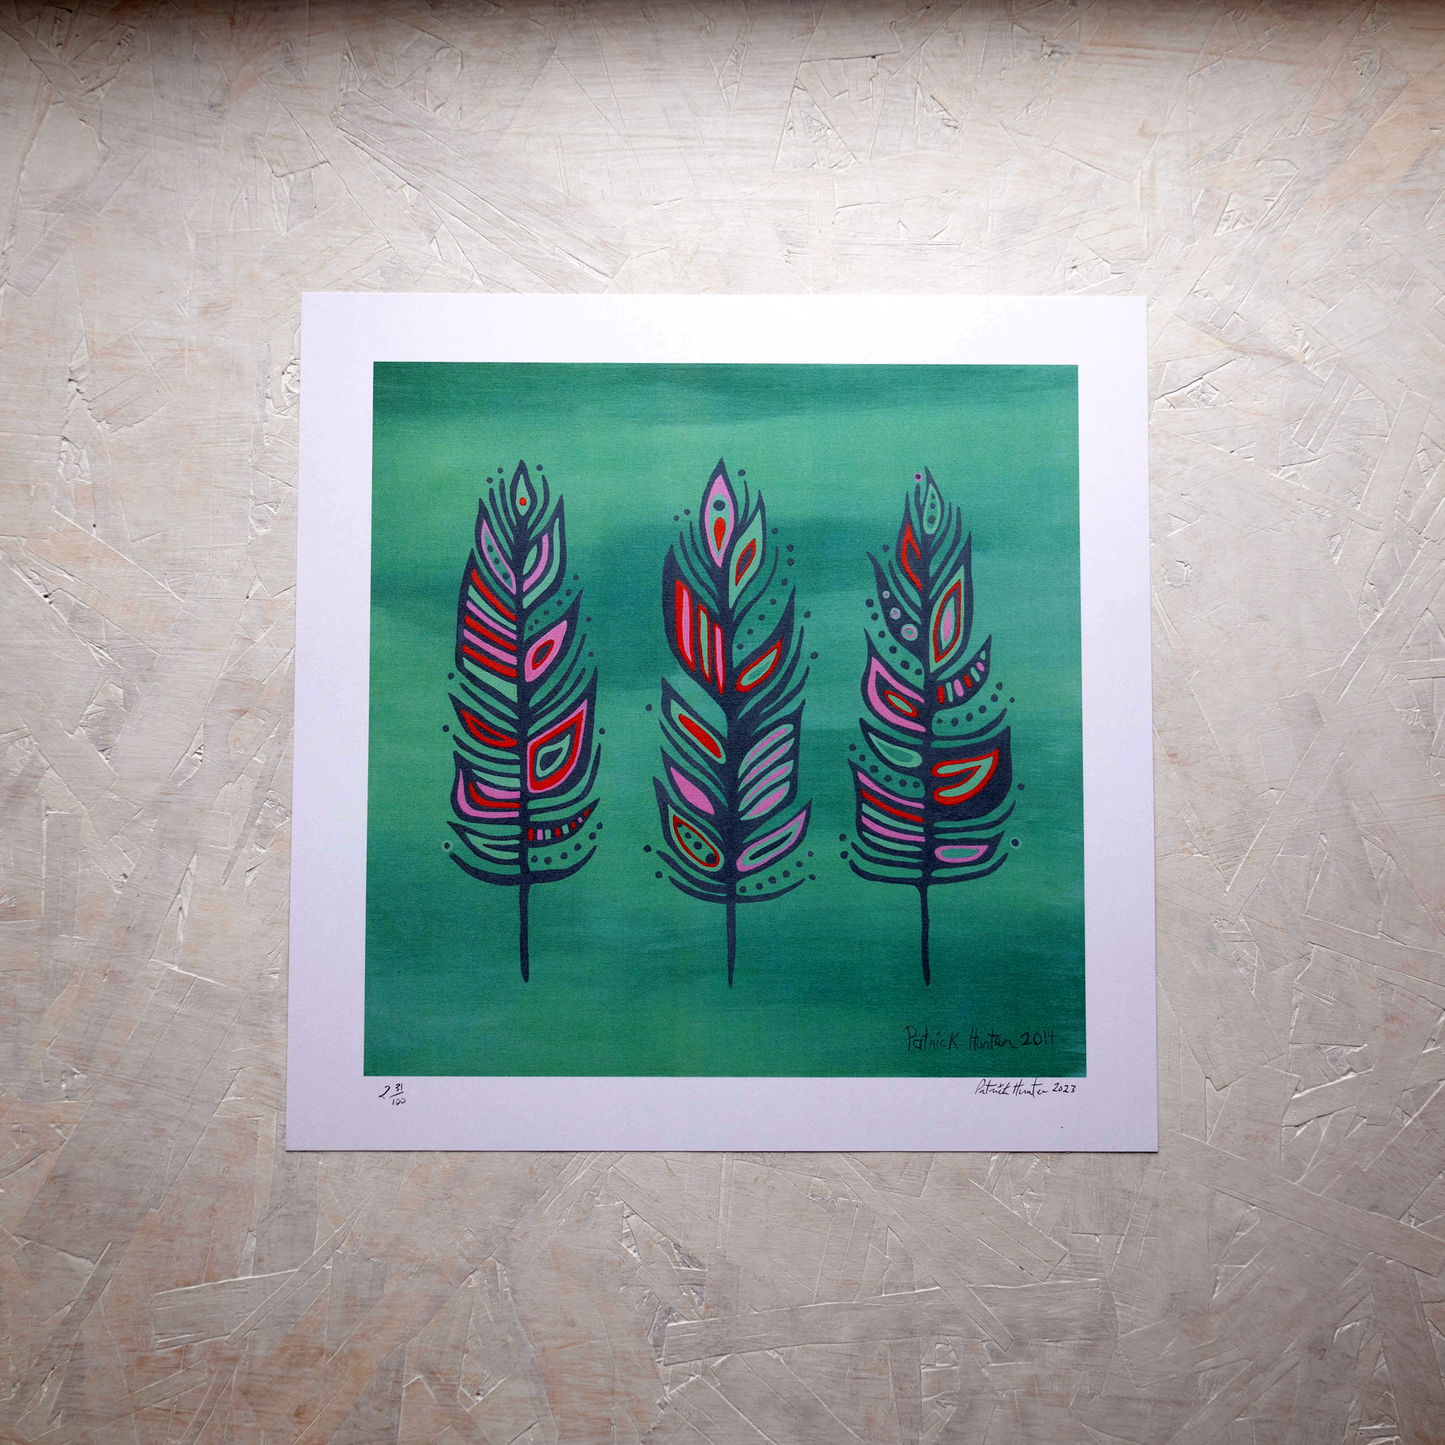 Print of Patrick Hunter's painting of three feathers in full colour on varigated background, woodland art style.